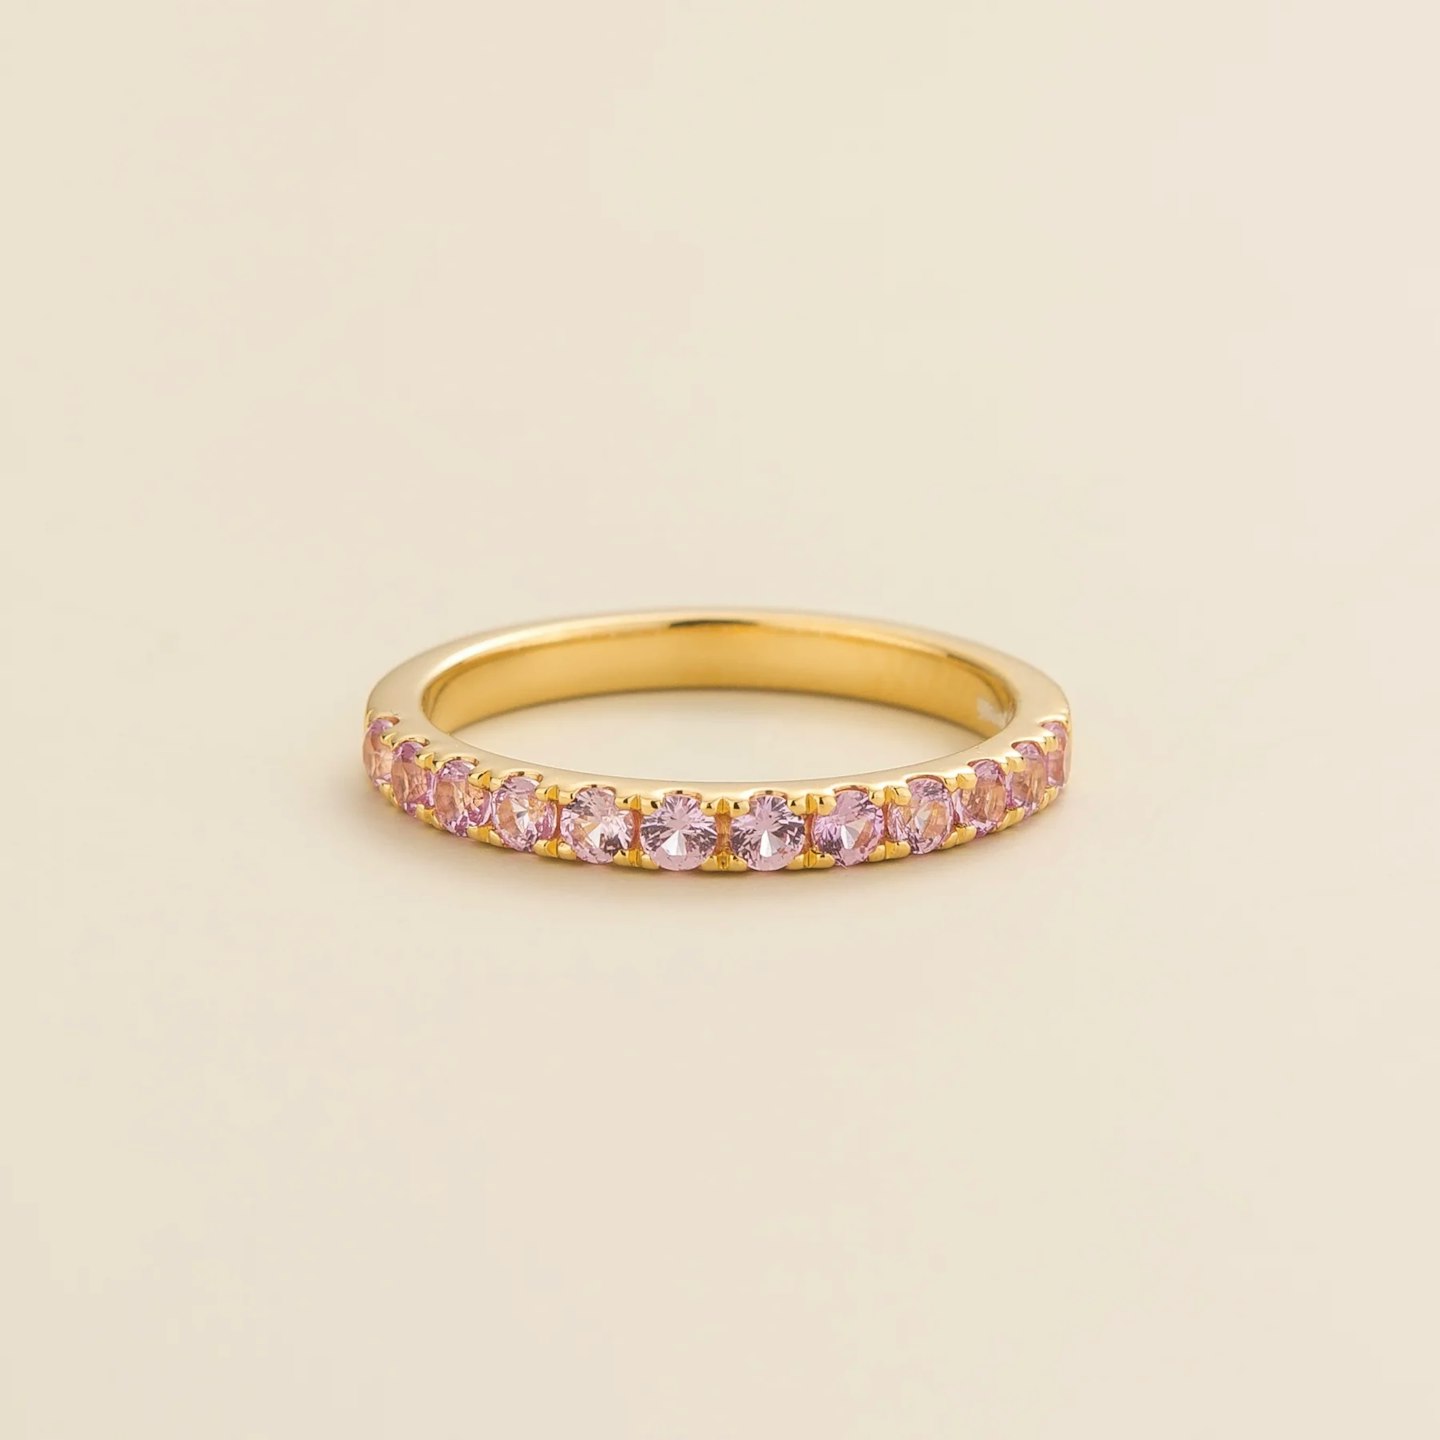 Juvetti, Salto ring in Pink sapphire, £250